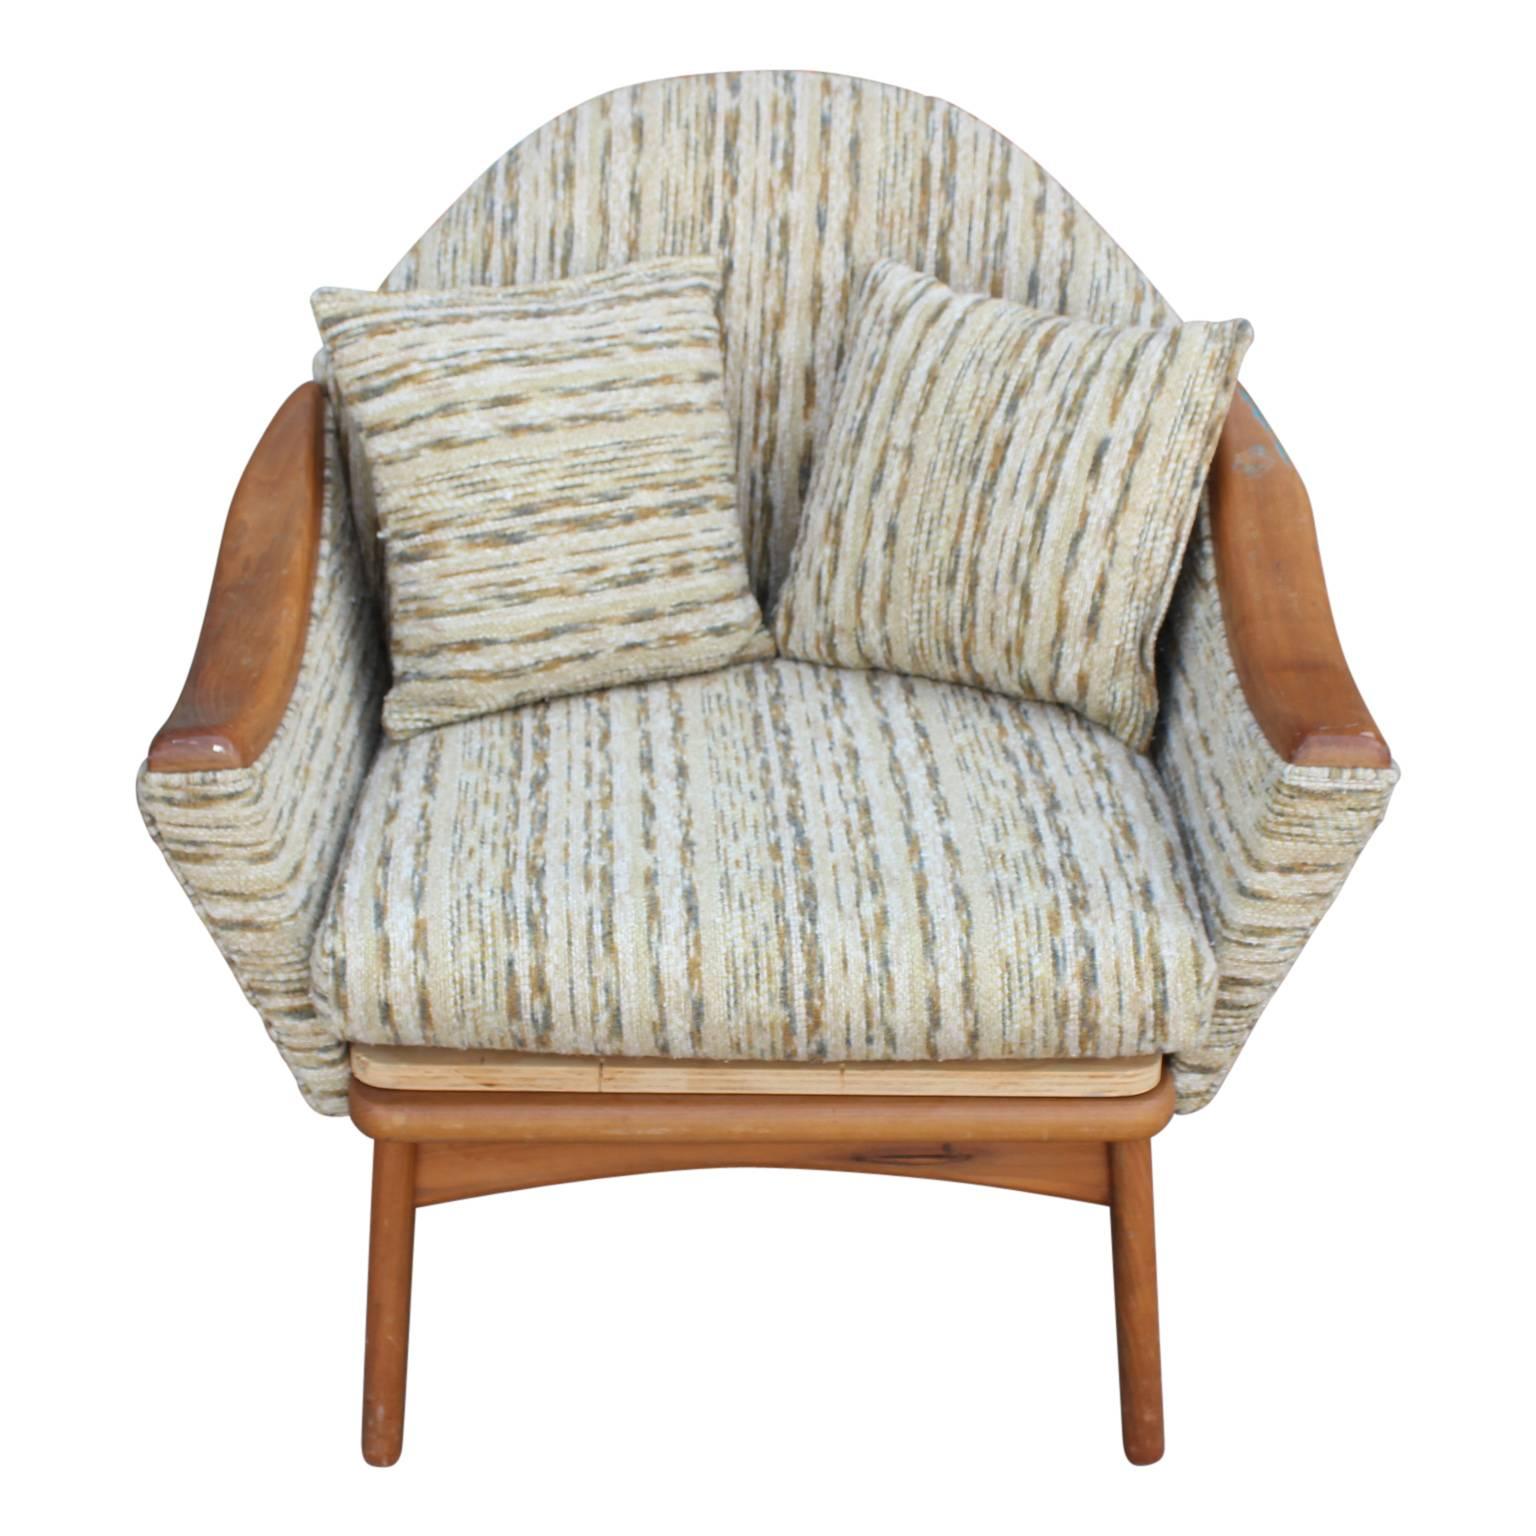 Stylish and comfortable lounge chair by Adrian Pearsall in its original 1960s fabric.